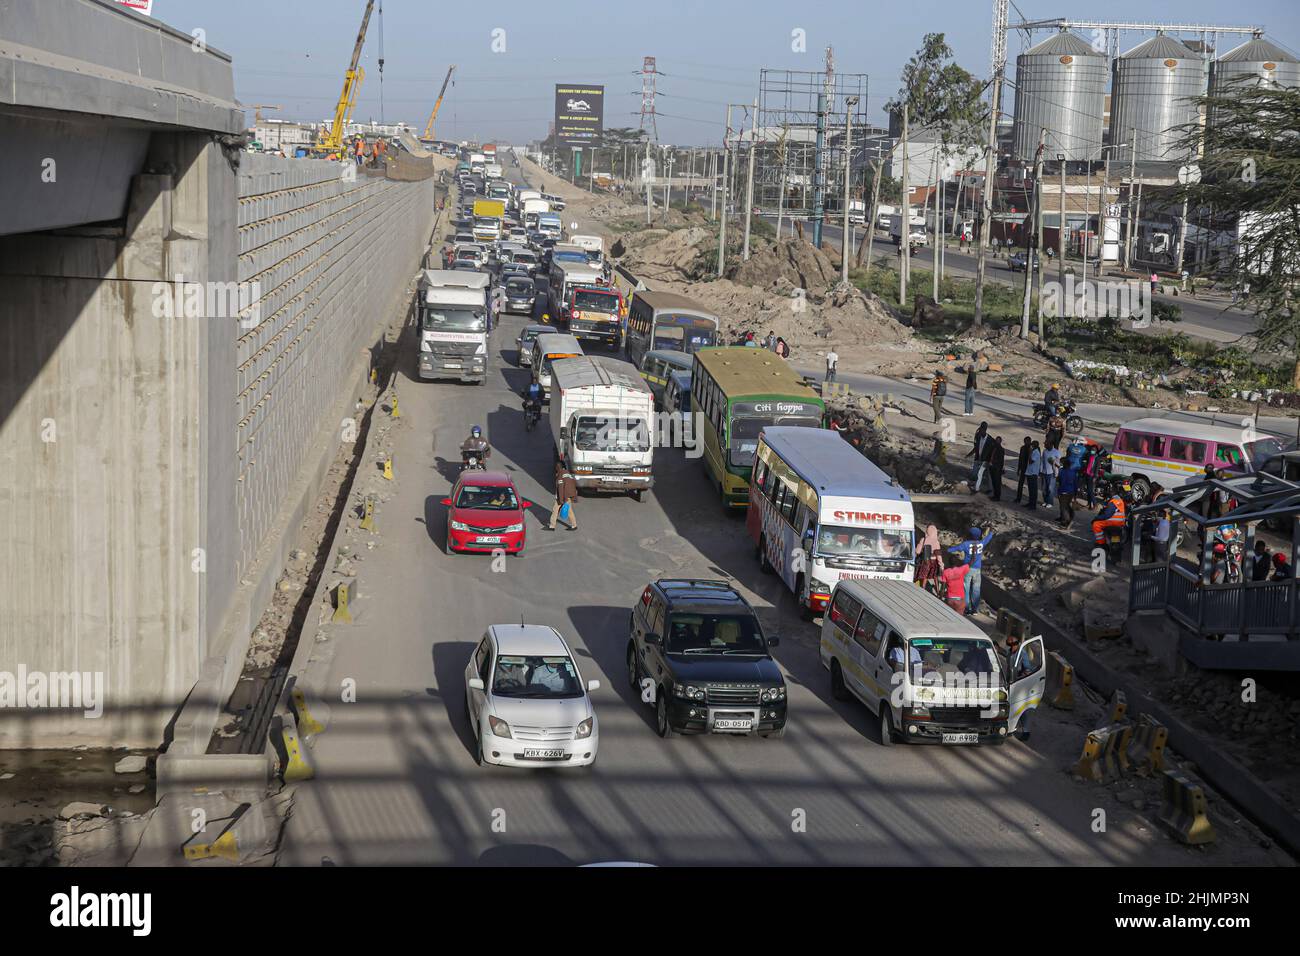 Nairobi, Kenya. 26th Jan, 2022. Traffic pilling up at a temporary bus stop at General motors area a section of the road that is almost complete of the Nairobi Expressway Project along the Mombasa road. The construction of the 27.1km long toll highway, the Nairobi Expressway continues and scheduled to be completed in June 2022. The Nairobi Expressway is meant to decongest the Nairobi city by providing faster and reliable transport. (Photo by Boniface Muthoni/SOPA Images/Sipa USA) Credit: Sipa USA/Alamy Live News Stock Photo